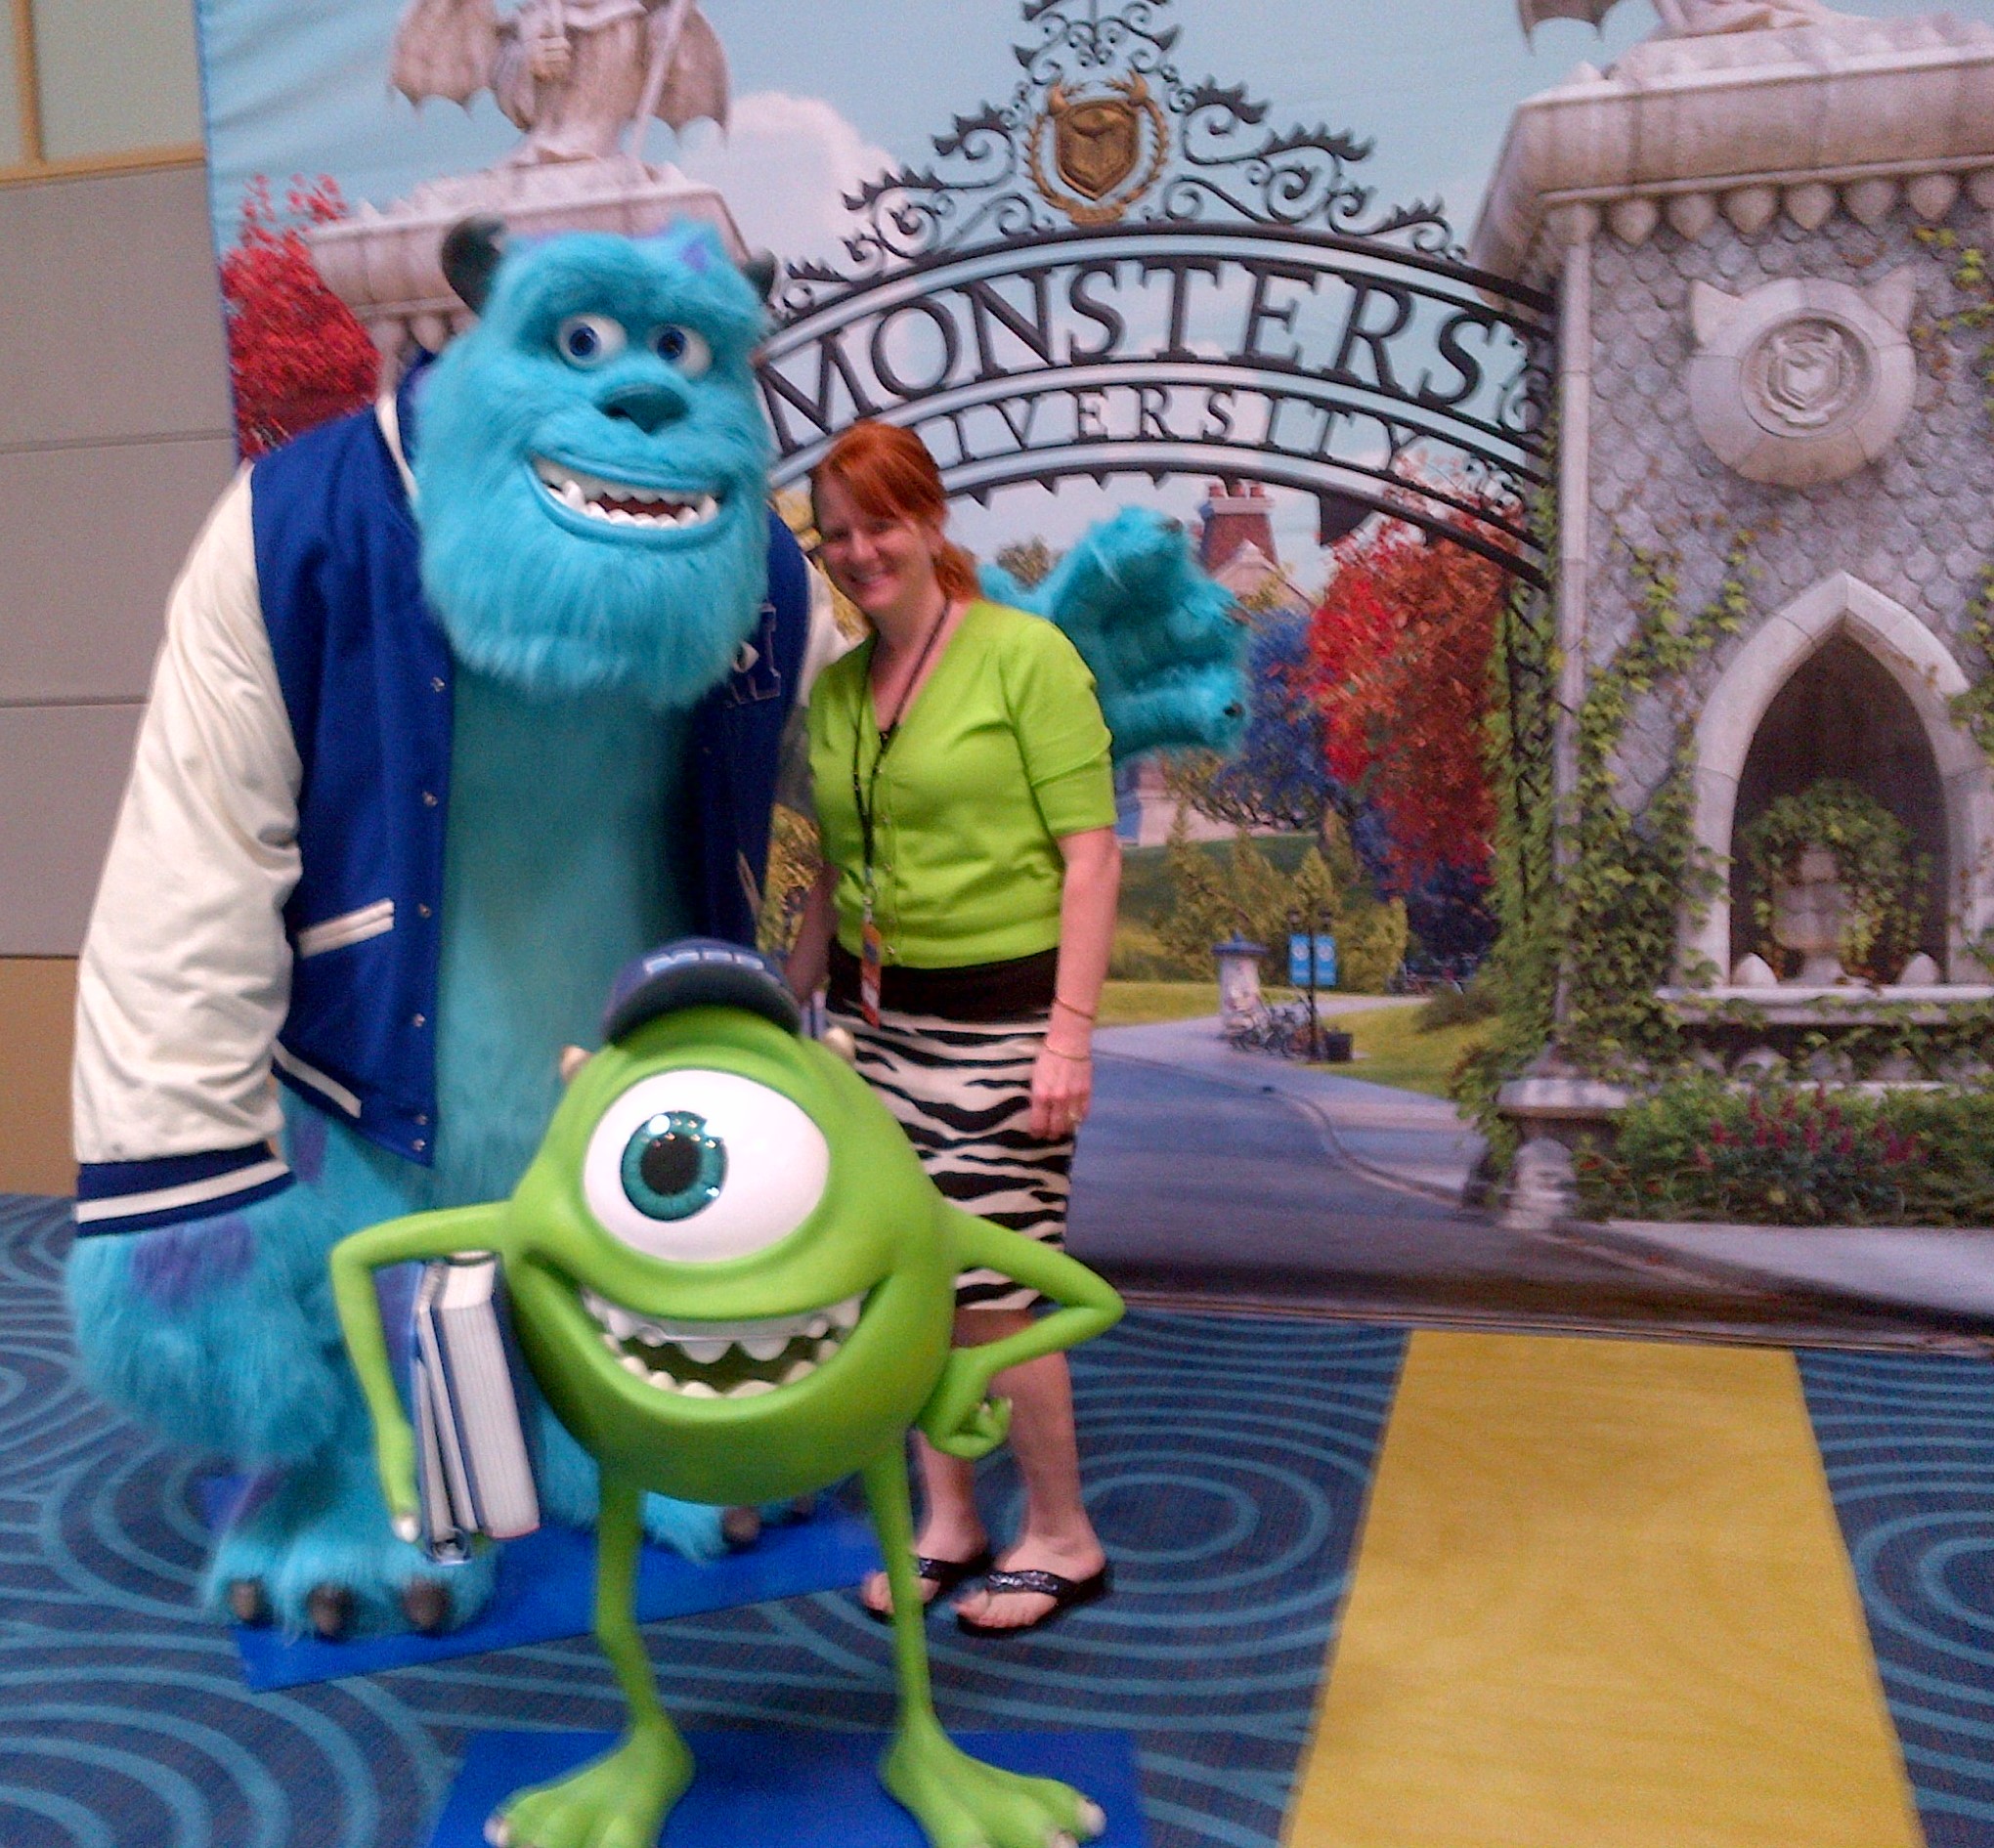 With Mike and Sulley from Monsters University